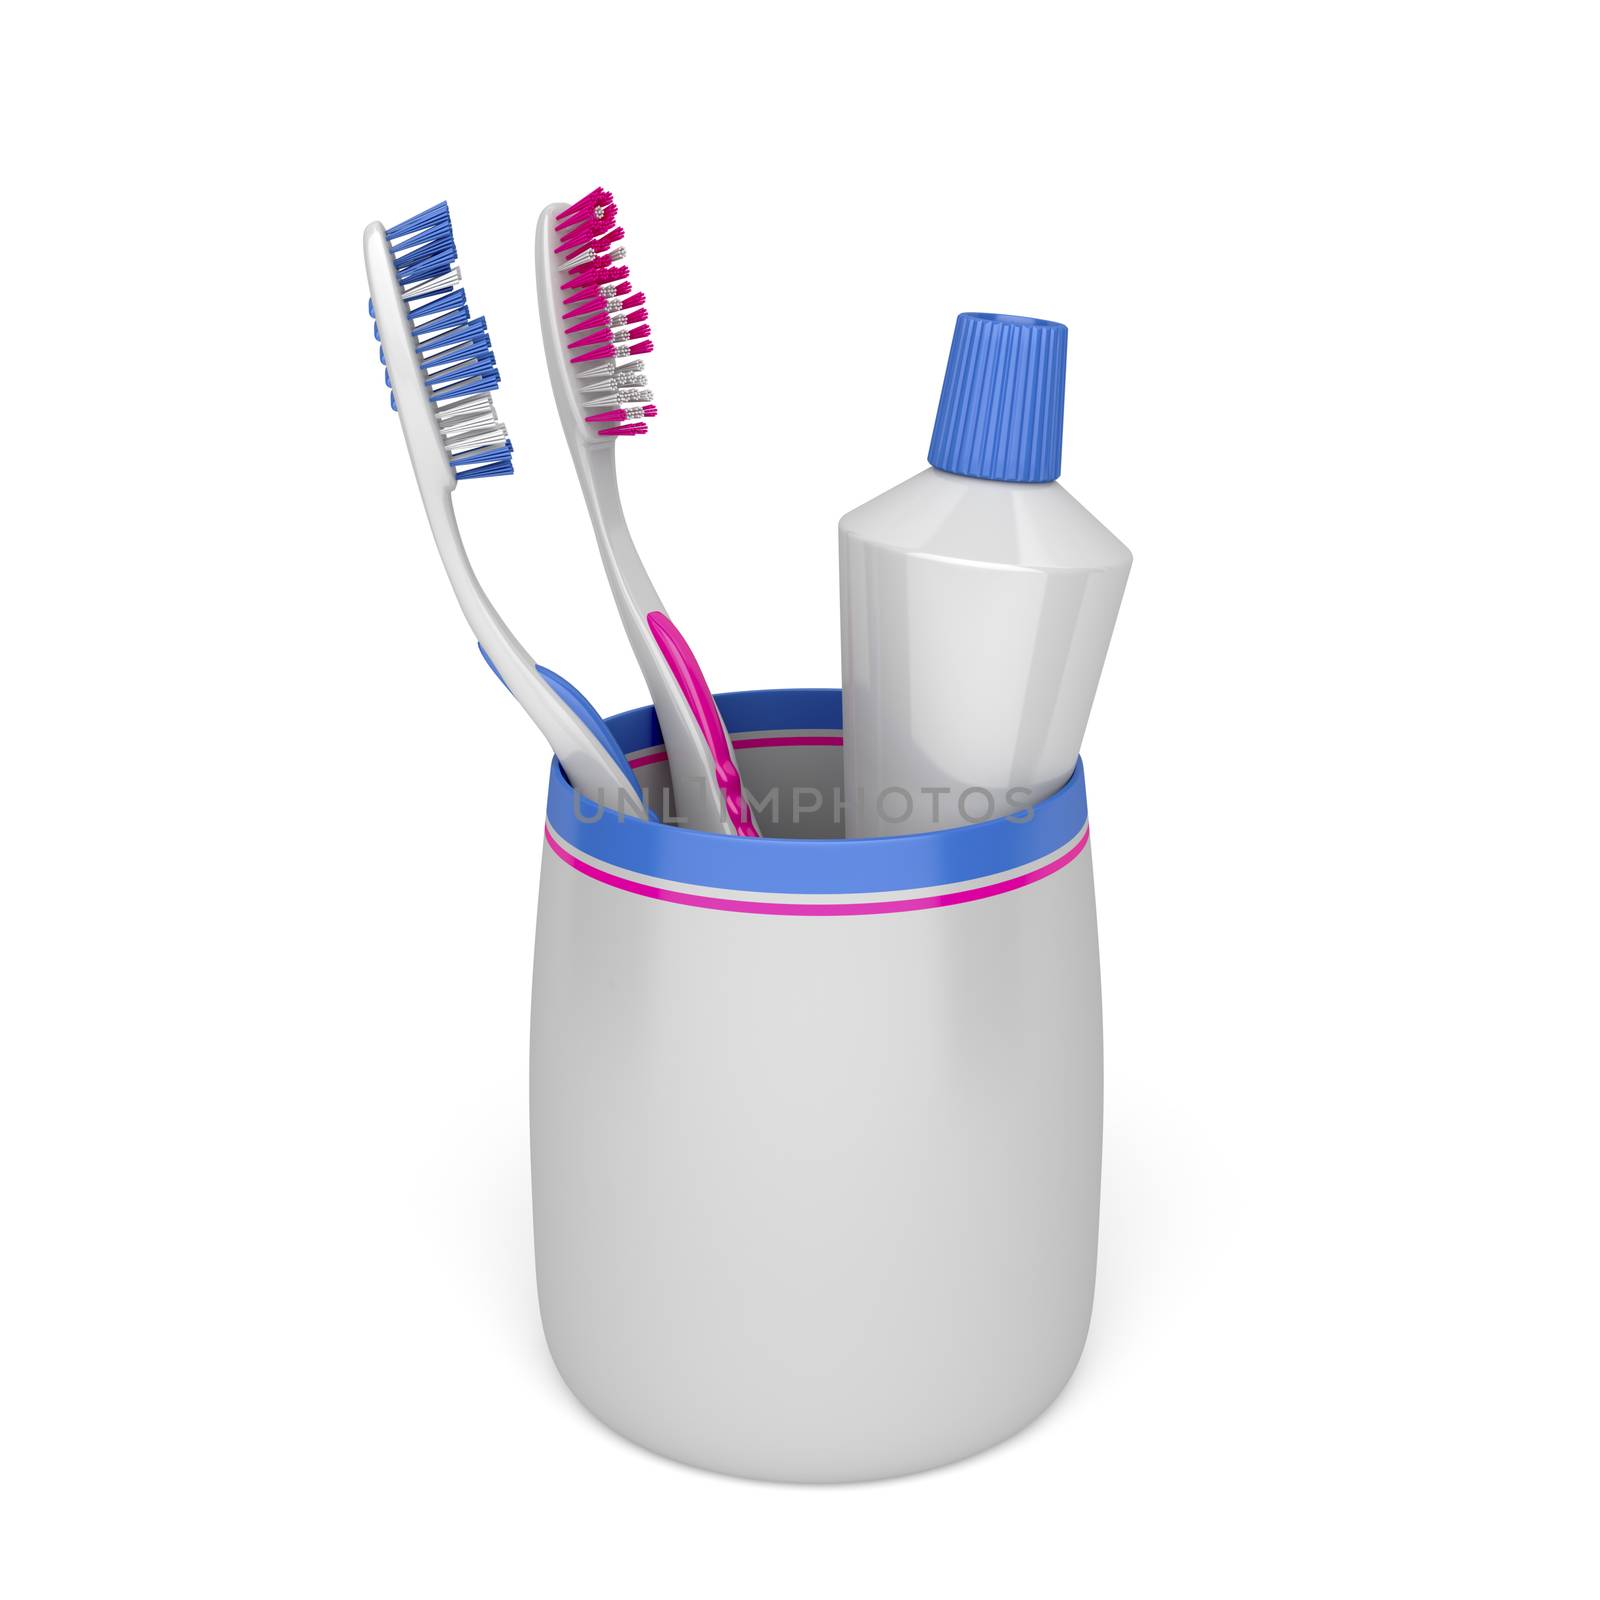 Toothbrushes and toothpaste by magraphics